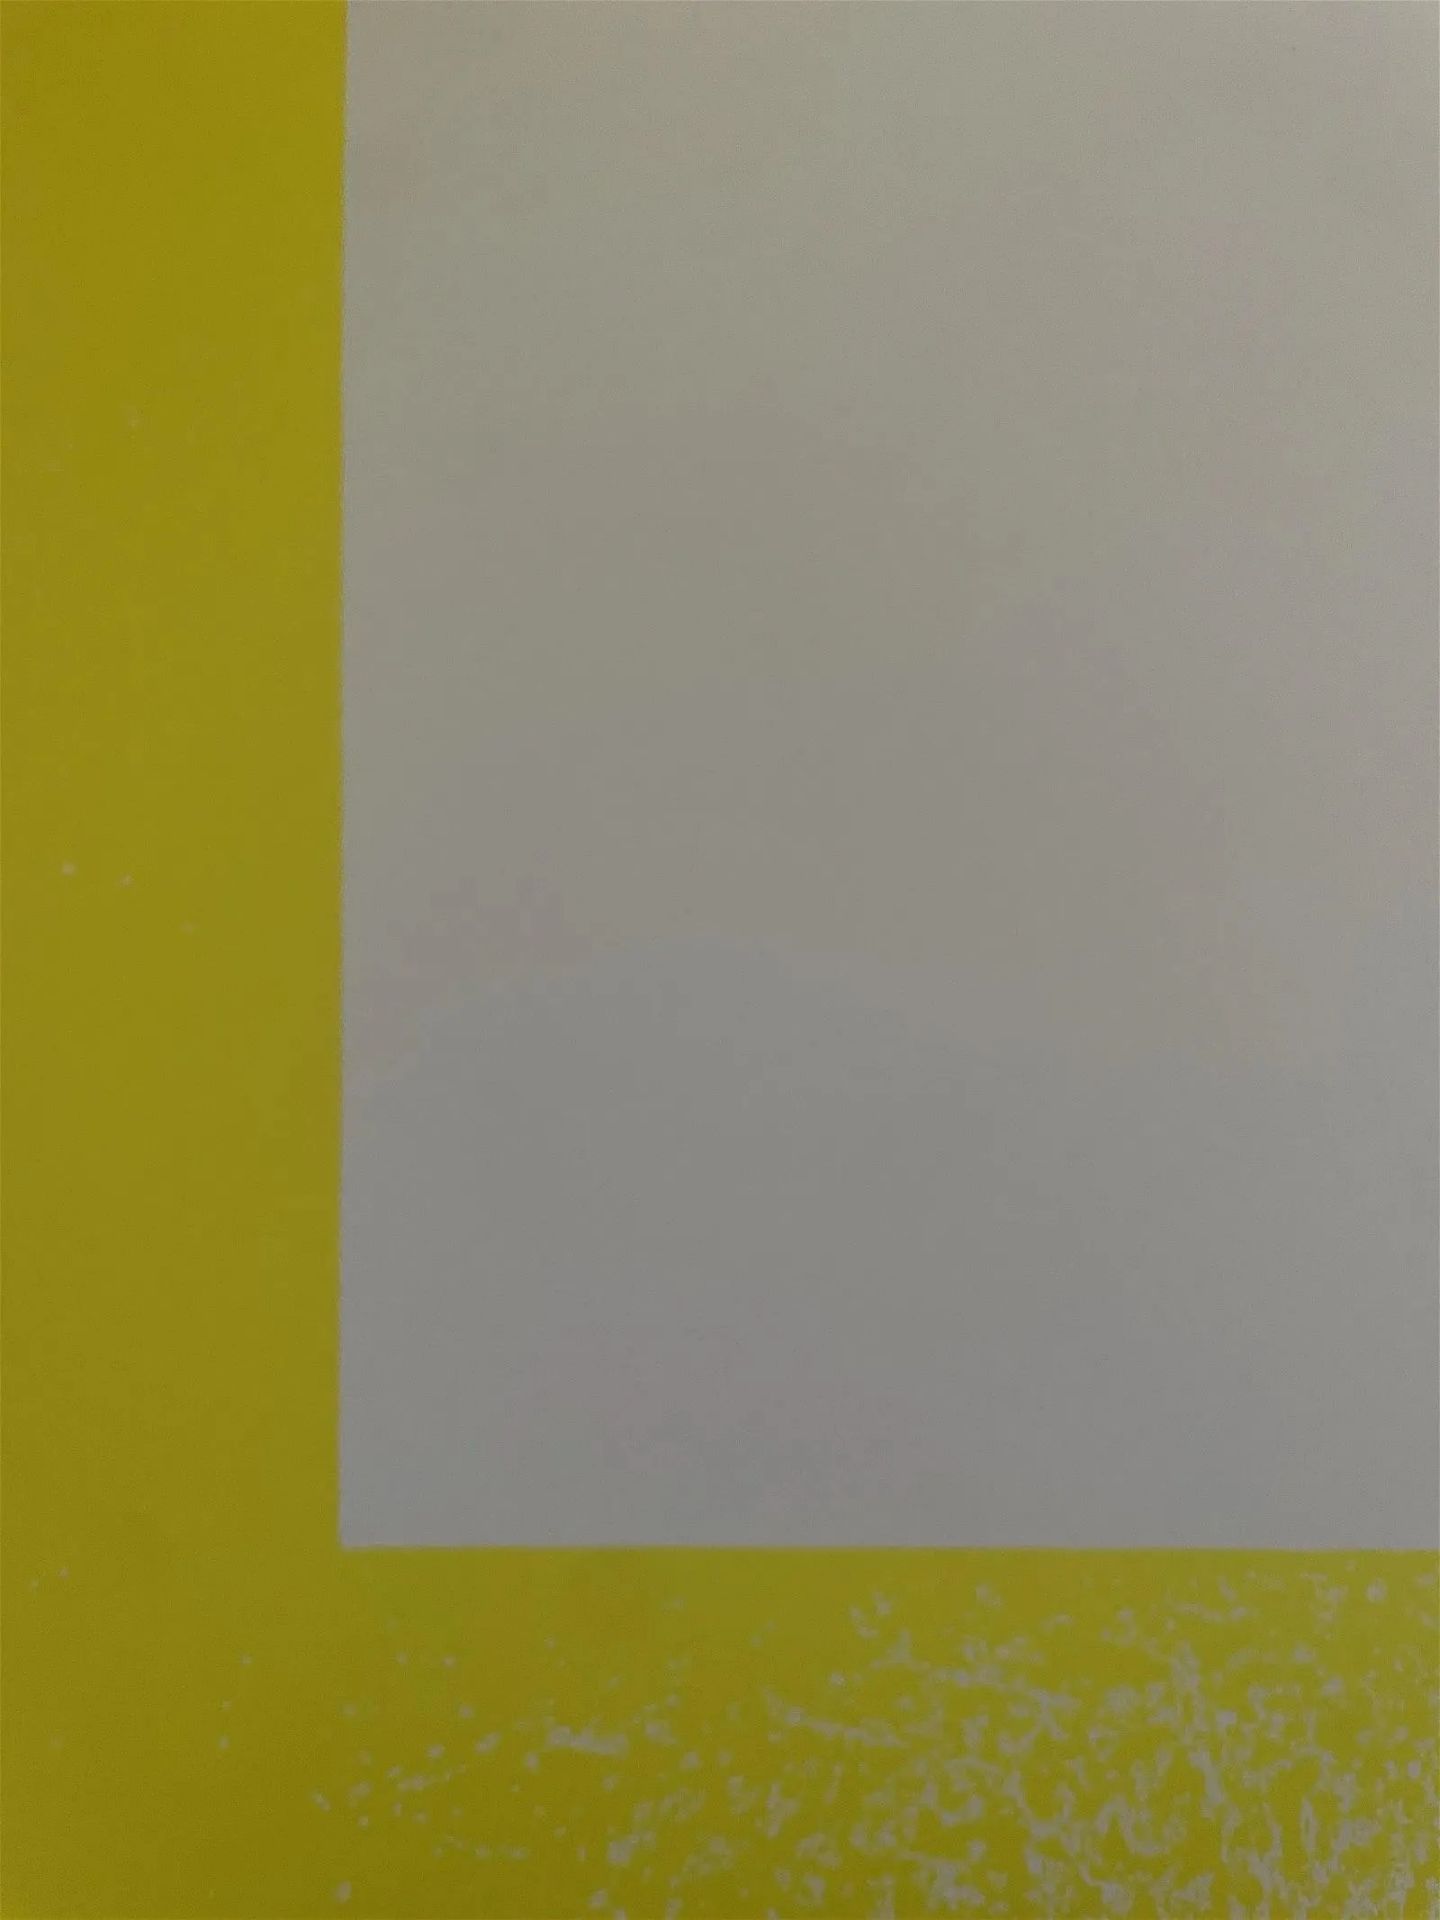 Richard Anuszkiewicz "Yellow Reversed, 1970" Offset Lithograph, Plate Signed, Dated - Image 3 of 6